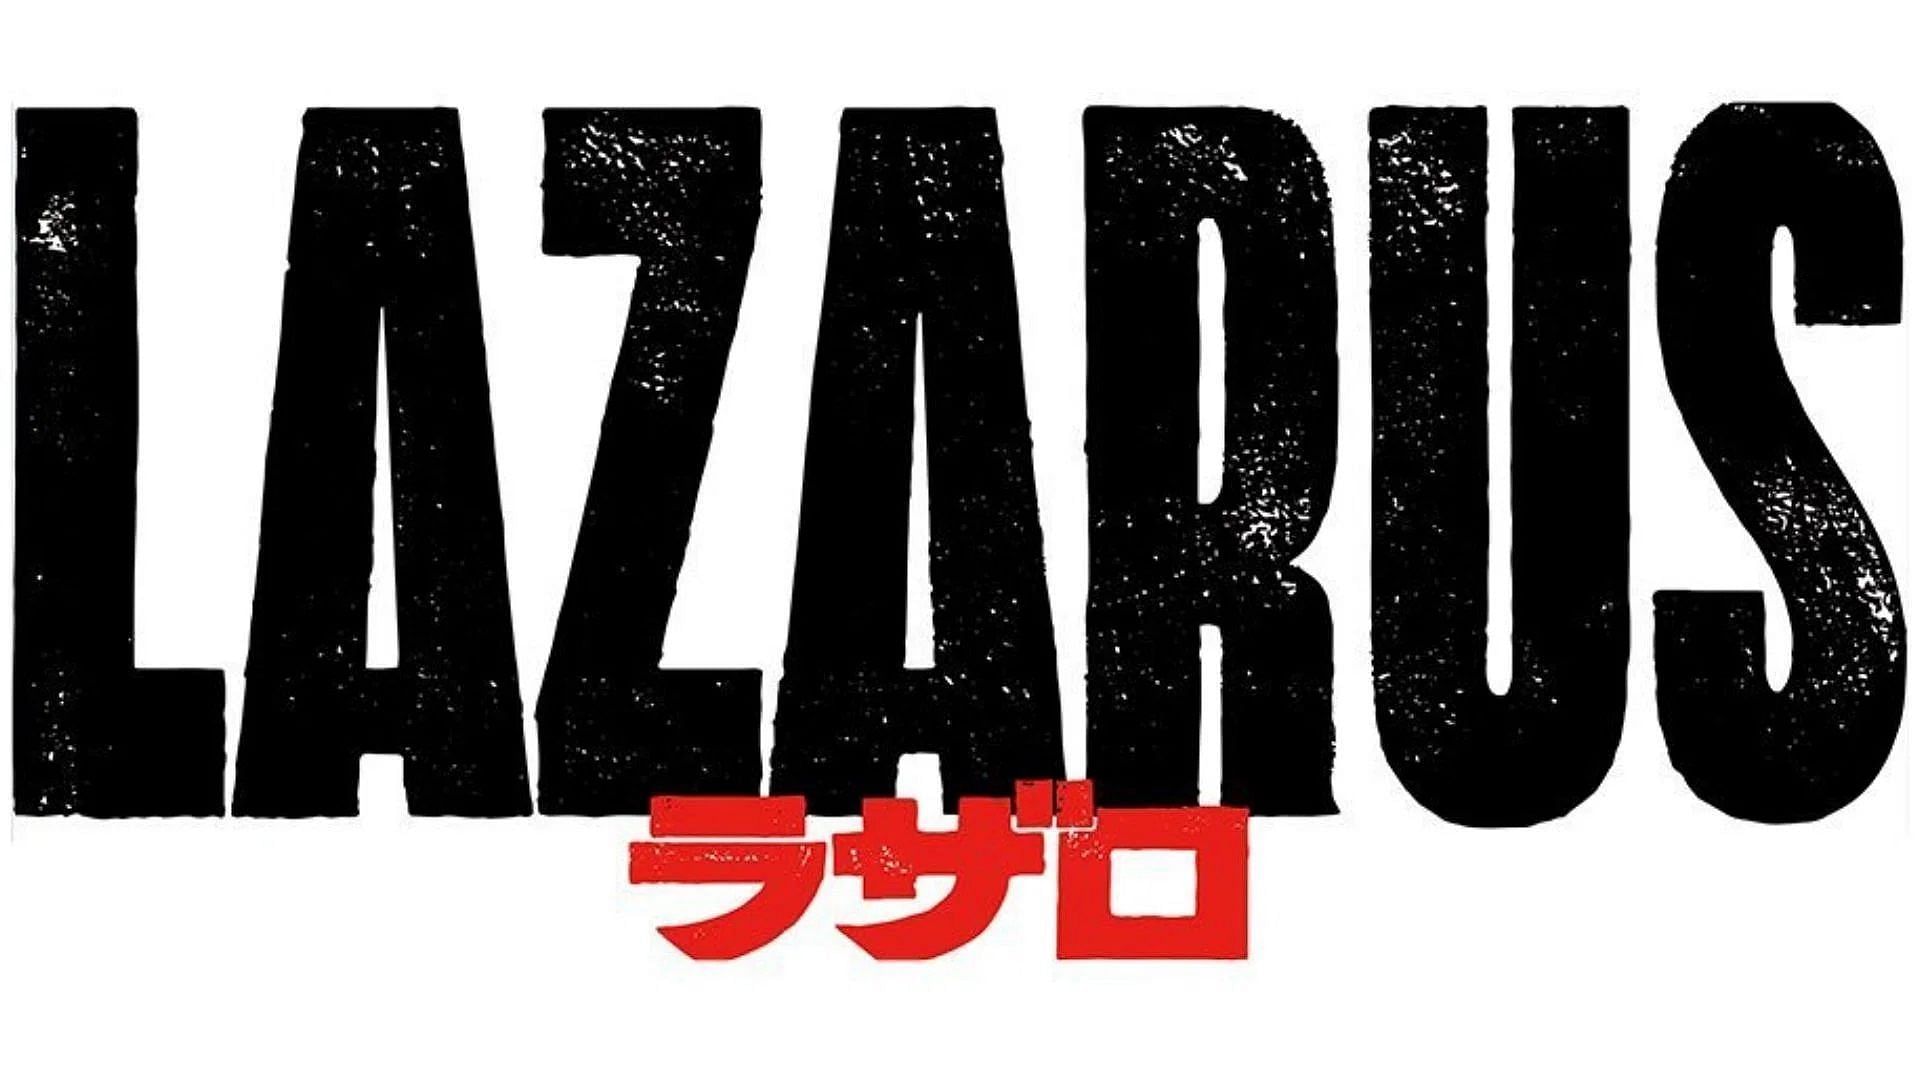 Lazarus vs Cowboy Bebop: Which one would be better? Explained